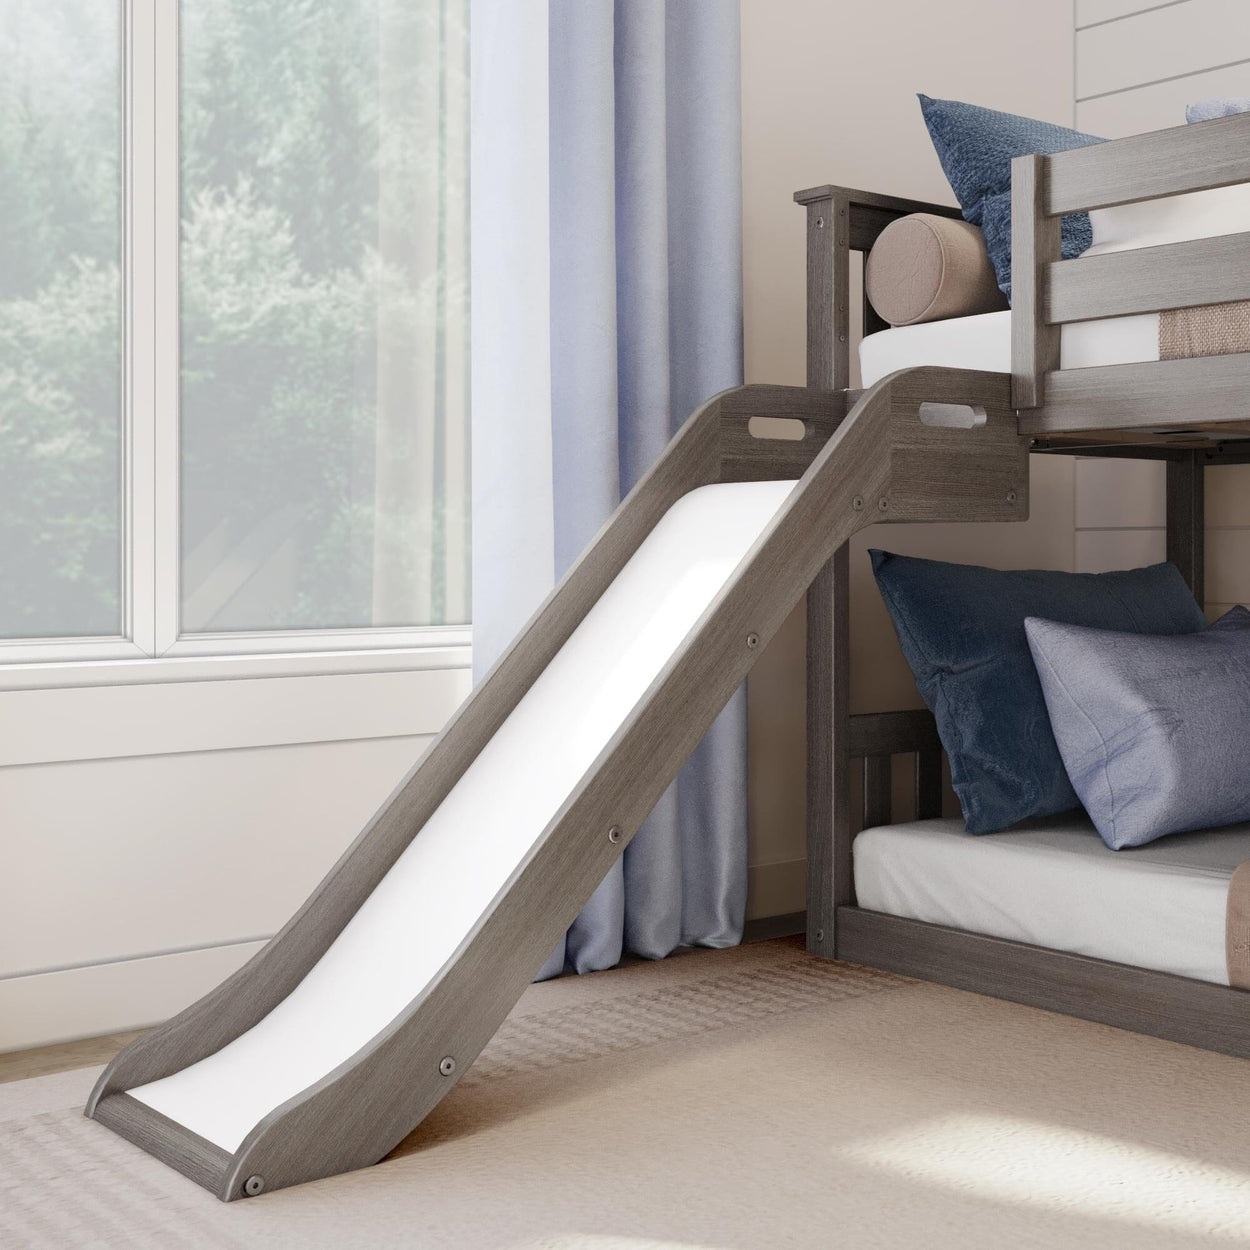 180417-151 : Bunk Beds Max & Lily Twin Over Twin Low Bunk with Slide and Ladder, Wooden Bunk beds with 14” Safety Guardrail for Kids, Toddlers, Boys, Girls, Teens, Bedroom Furniture, Clay